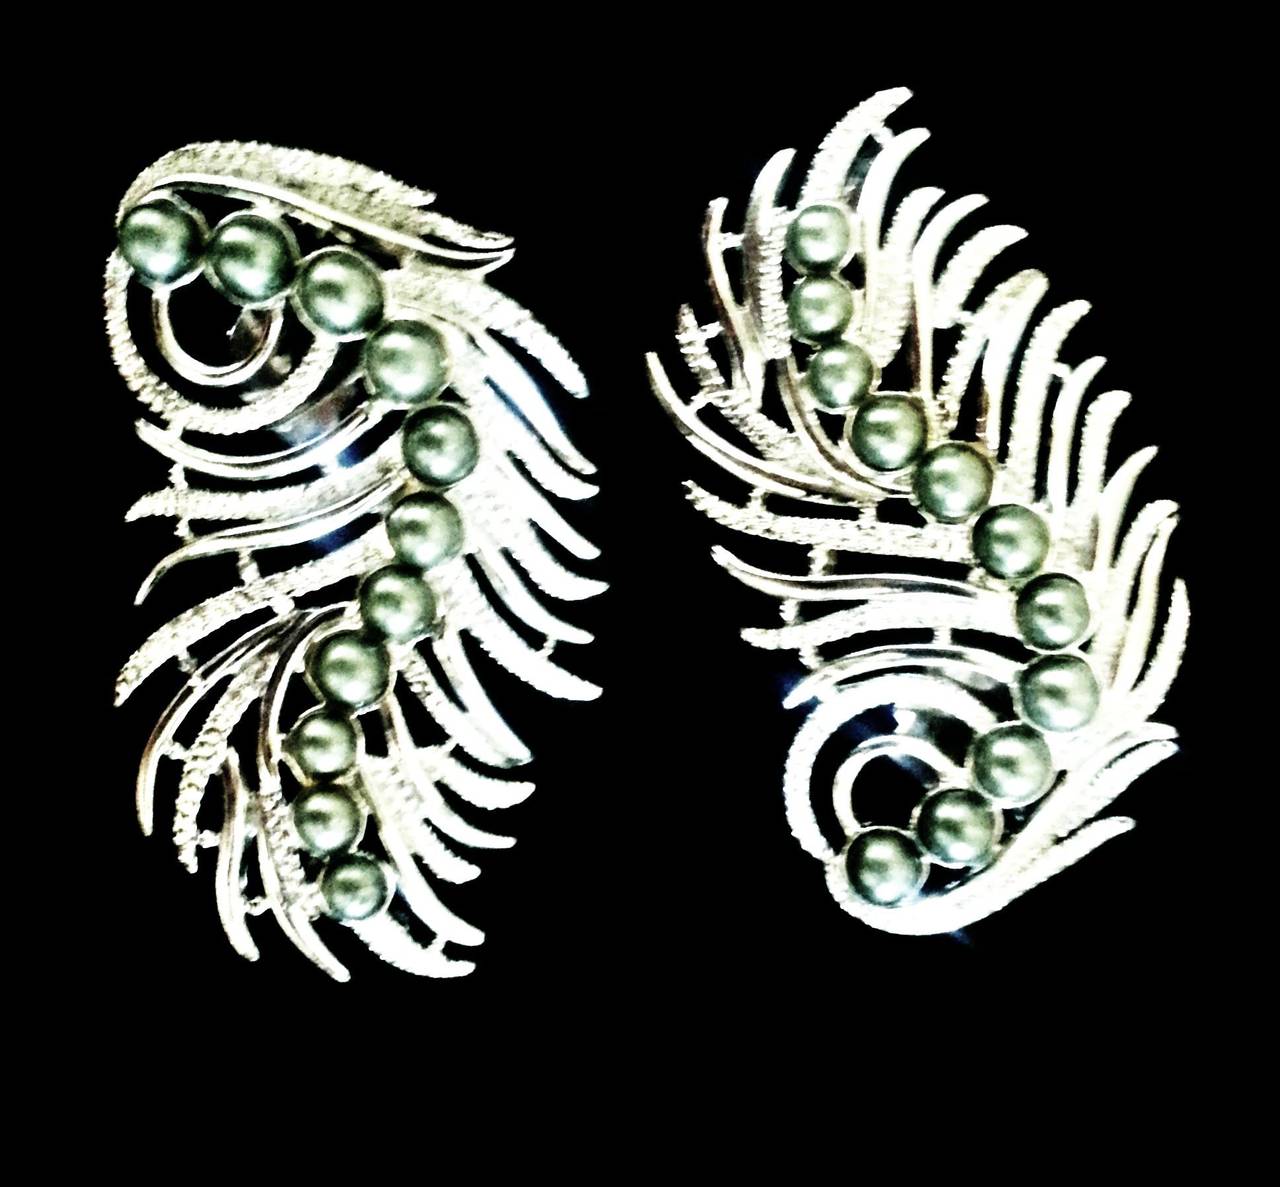 Unique and highly collectable silver and pearl ear cuff earrings made for Audrey Hepburn (who can be seen wearing them in image 3).

The earrings were created for Ms Hepburn by the famed American designer Sarah Coventry, whose clients included